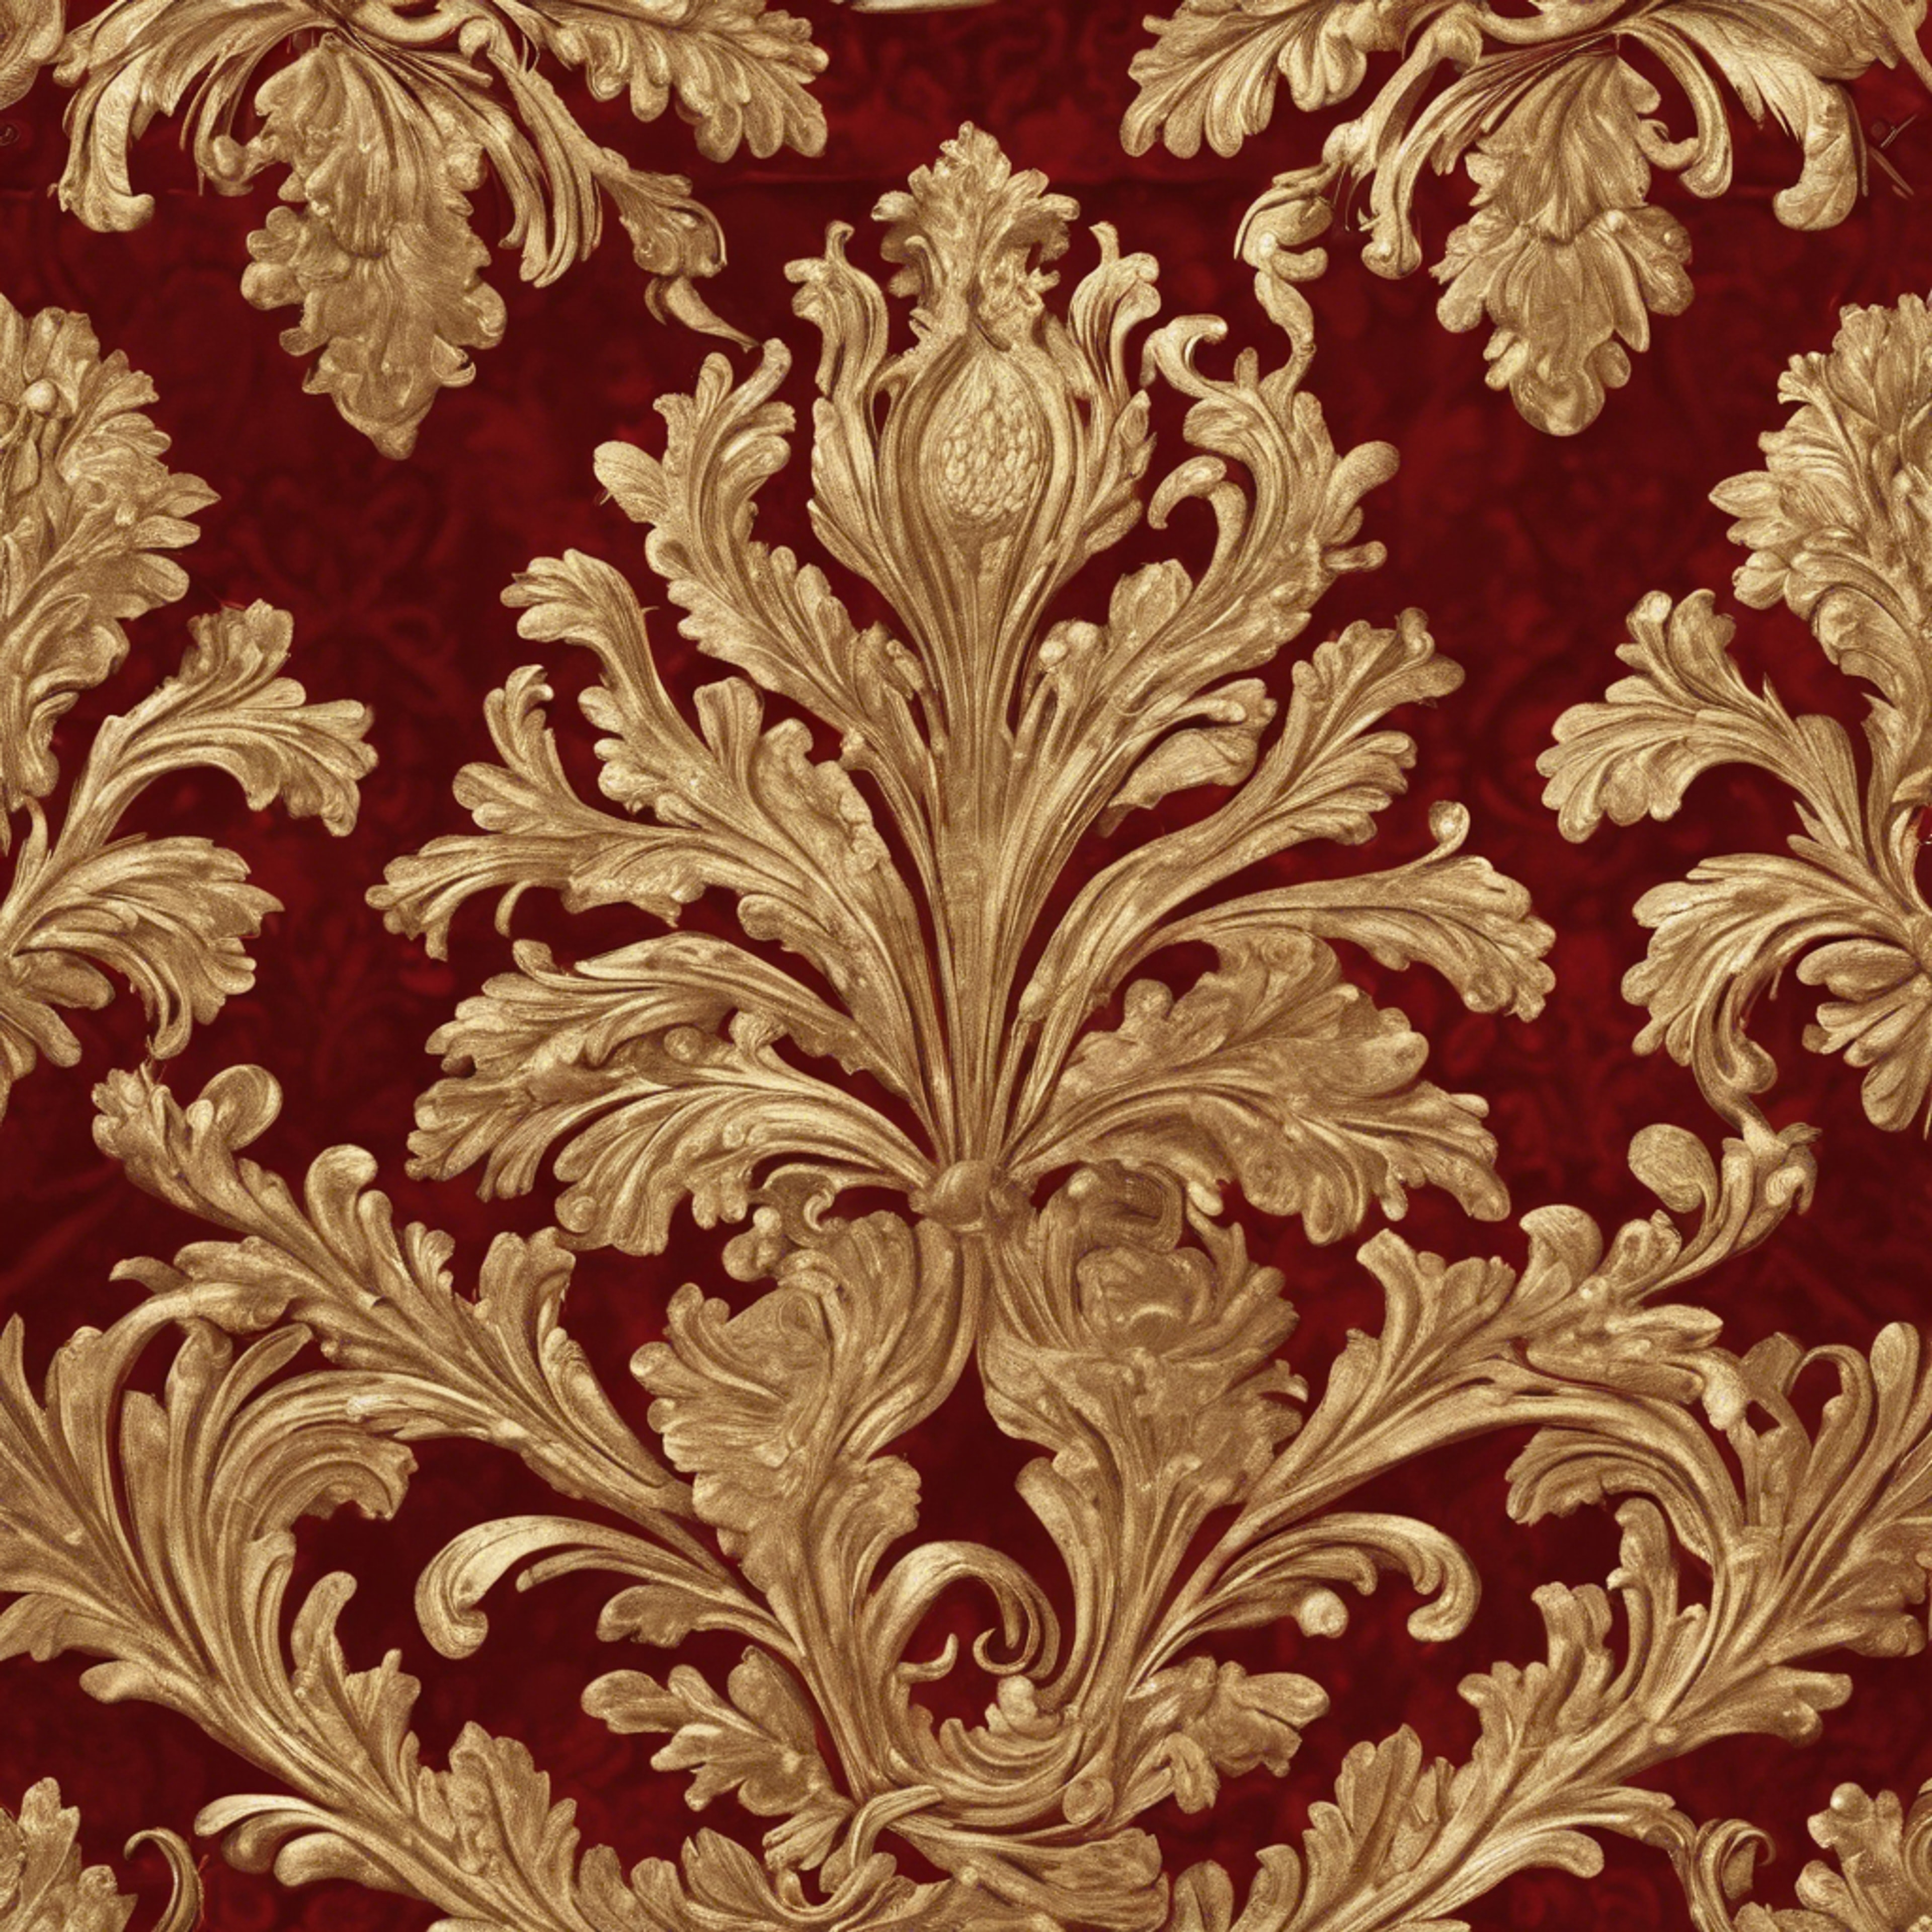 A dramatic seamless design of antique gold damask on a canvas of cardinal red velvet. วอลล์เปเปอร์[ac0bd922427a4985975e]